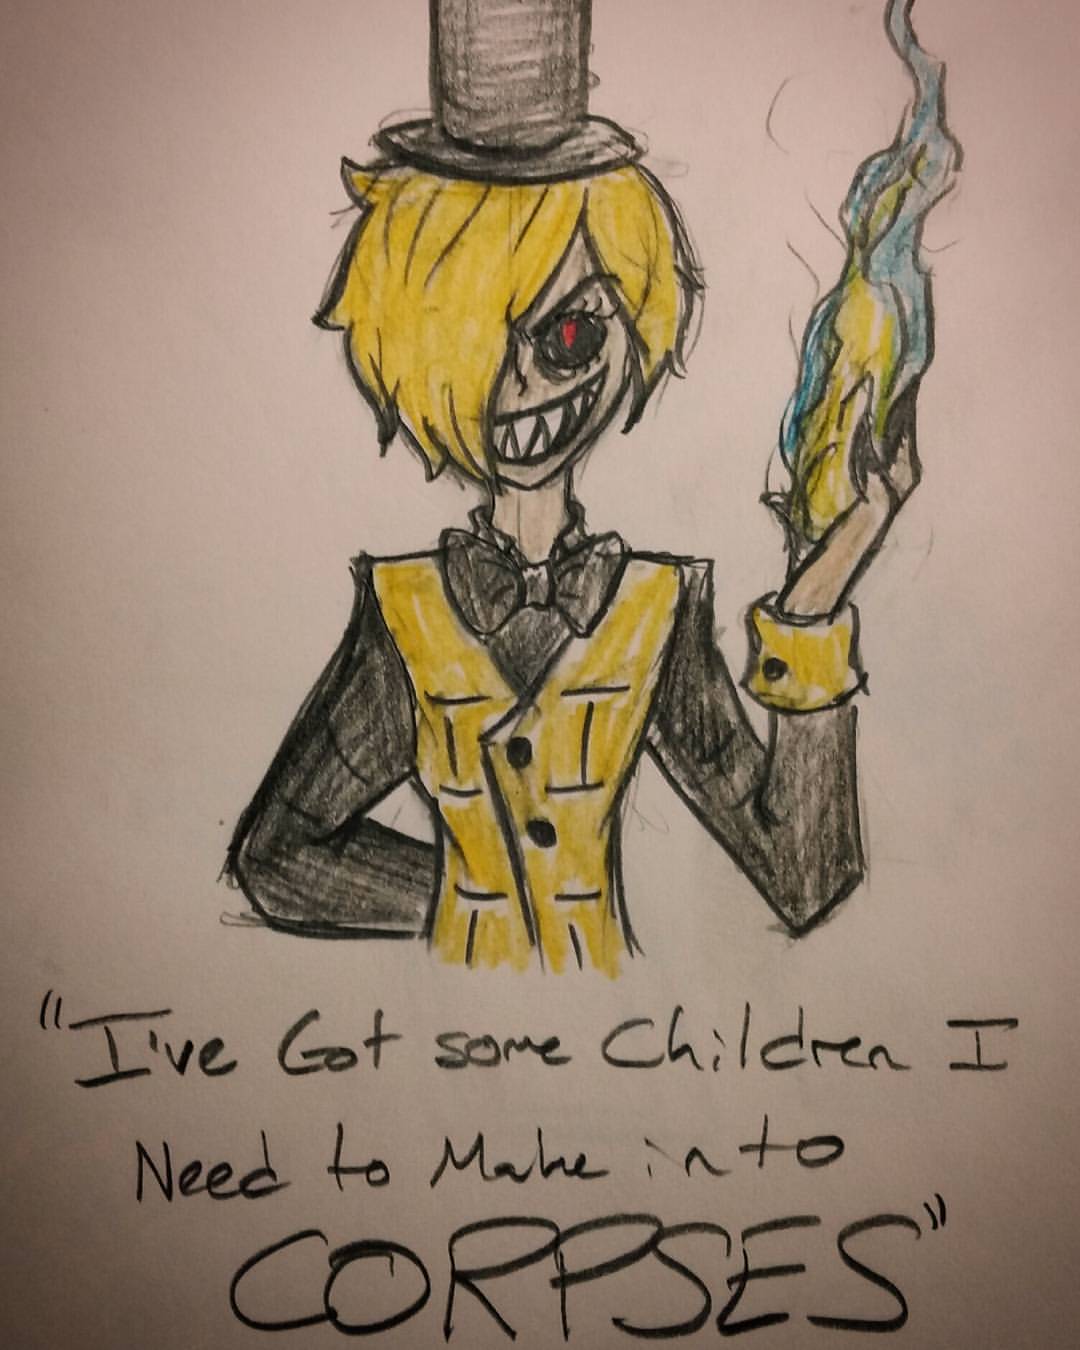 Humanized Bill Cipher from Gravity Falls. I don&rsquo;t really watch Gravity